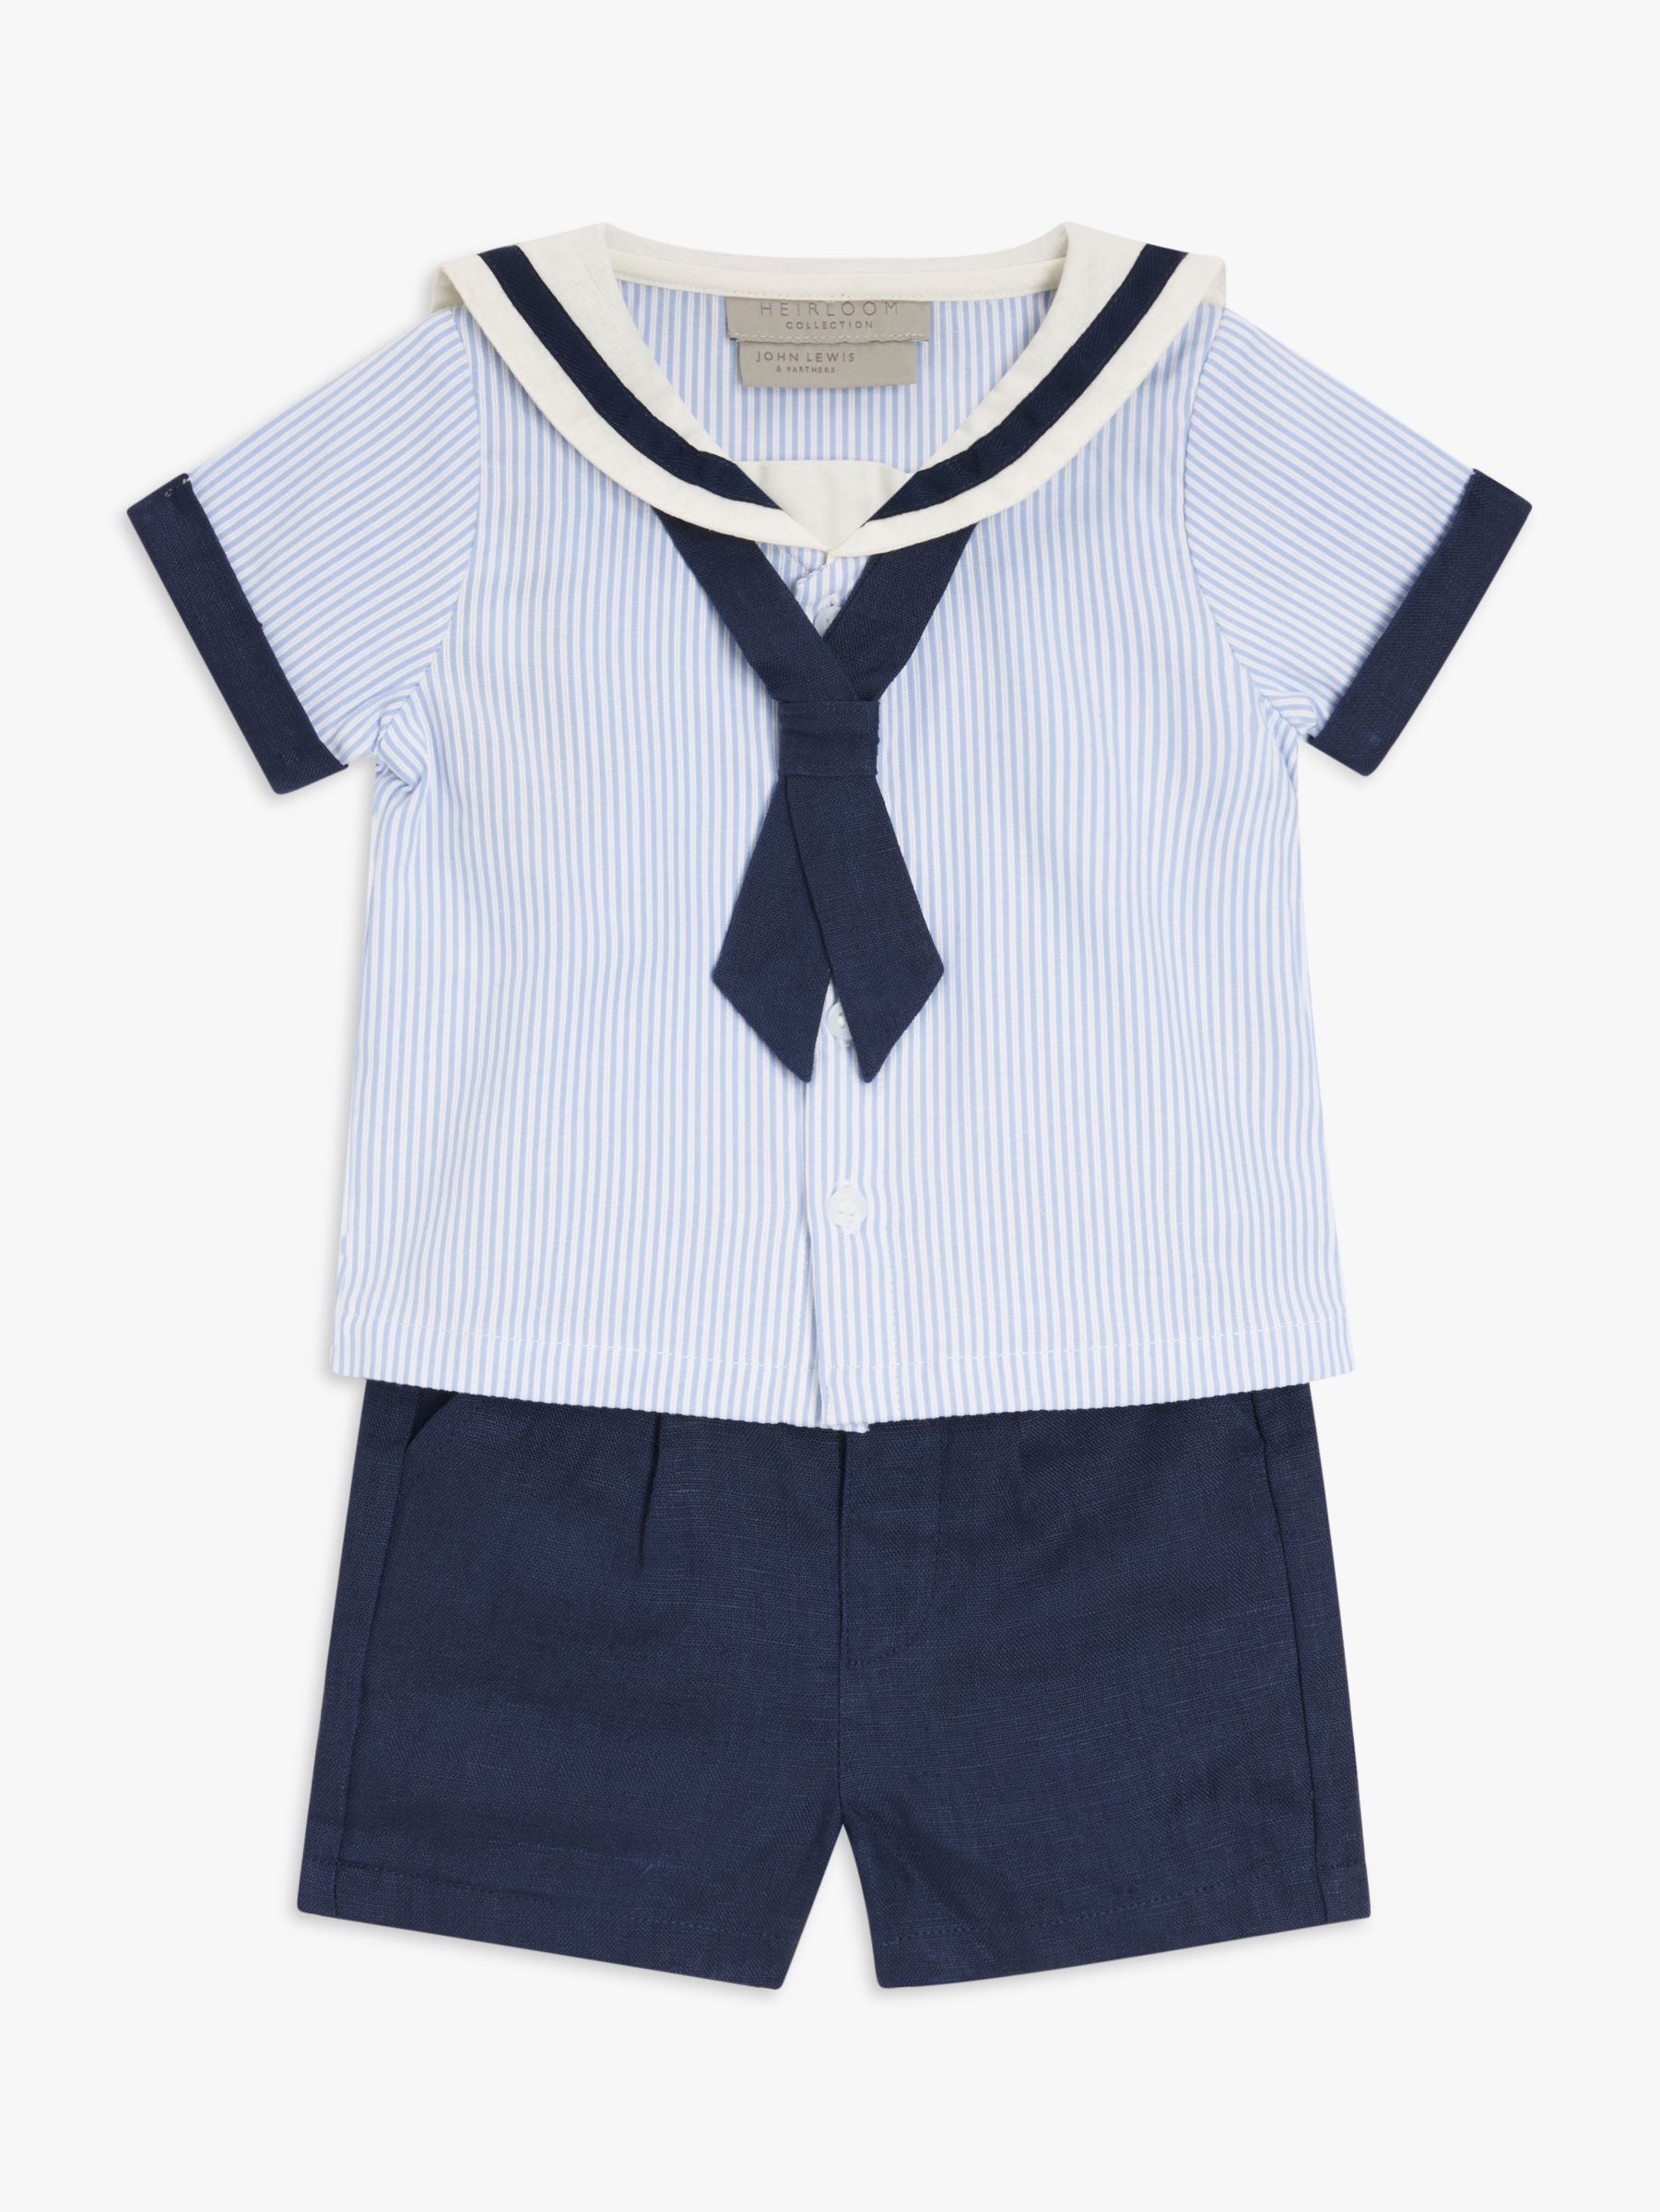 John Lewis Heirloom Collection Baby Sailor Shirt and Shorts Set, Blue, 12-18 months